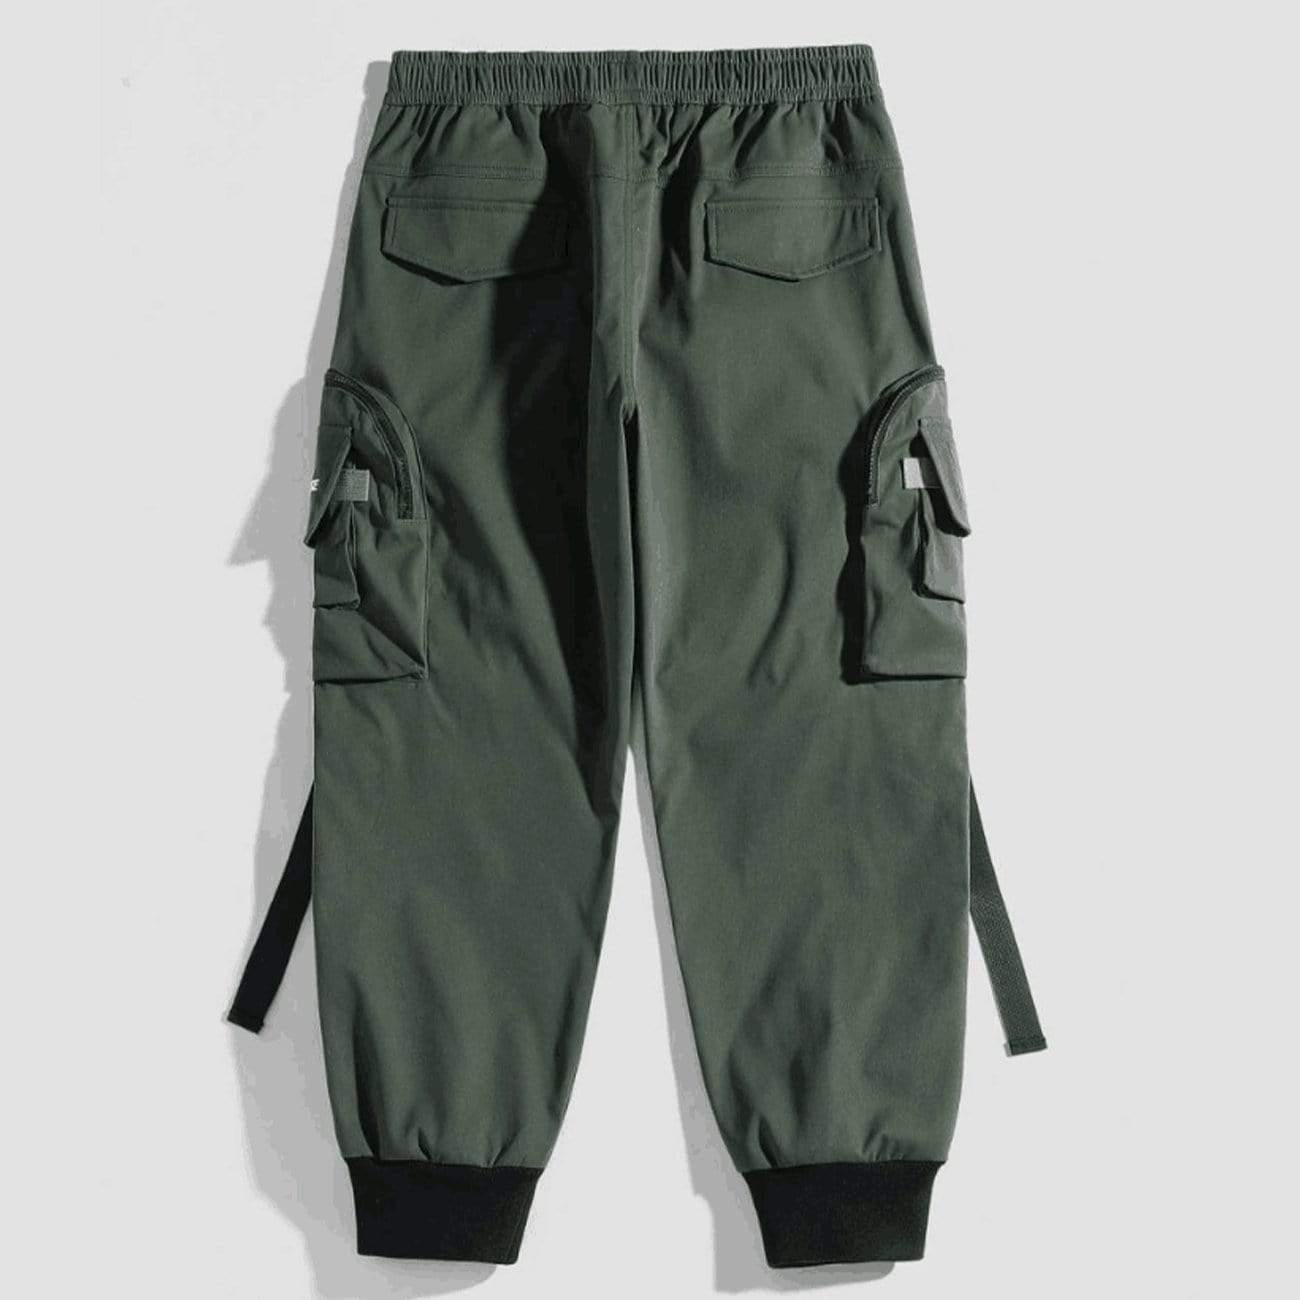 WLS Function Buttons Ribbons Zipper Pockets Cargo Pants